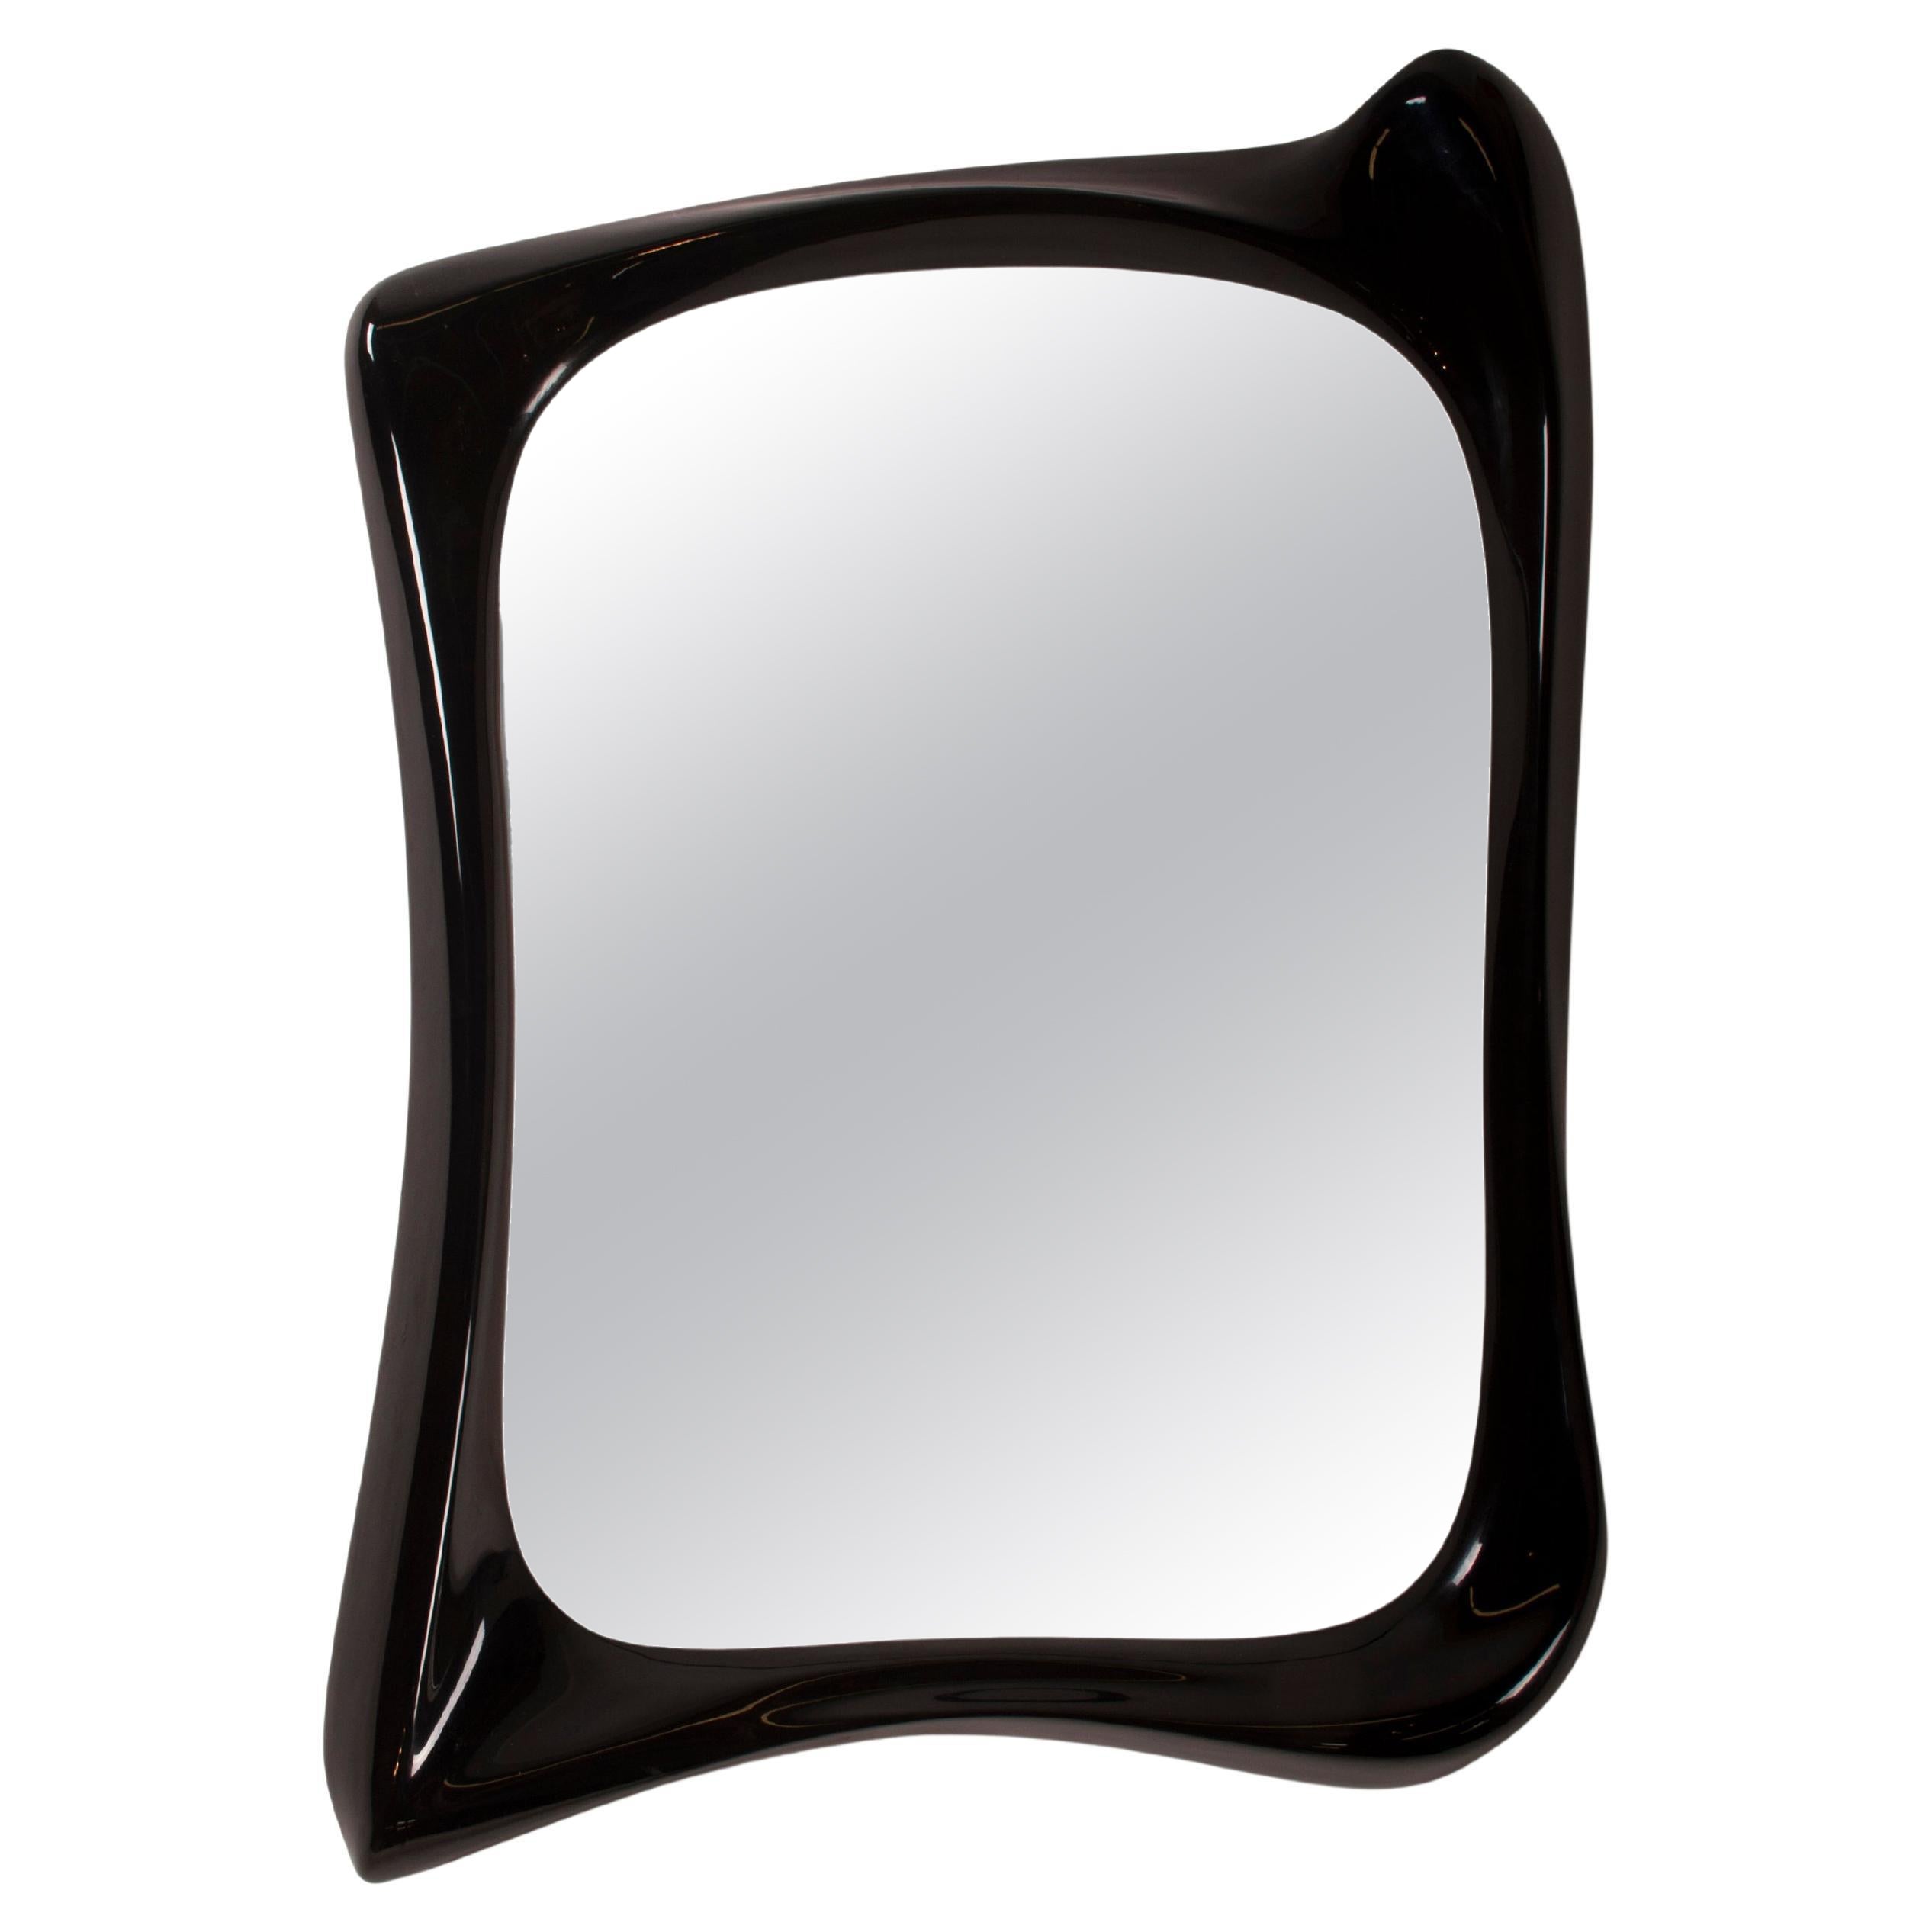 Amorph Narcissus Modern Mirror in Black lacquer finish